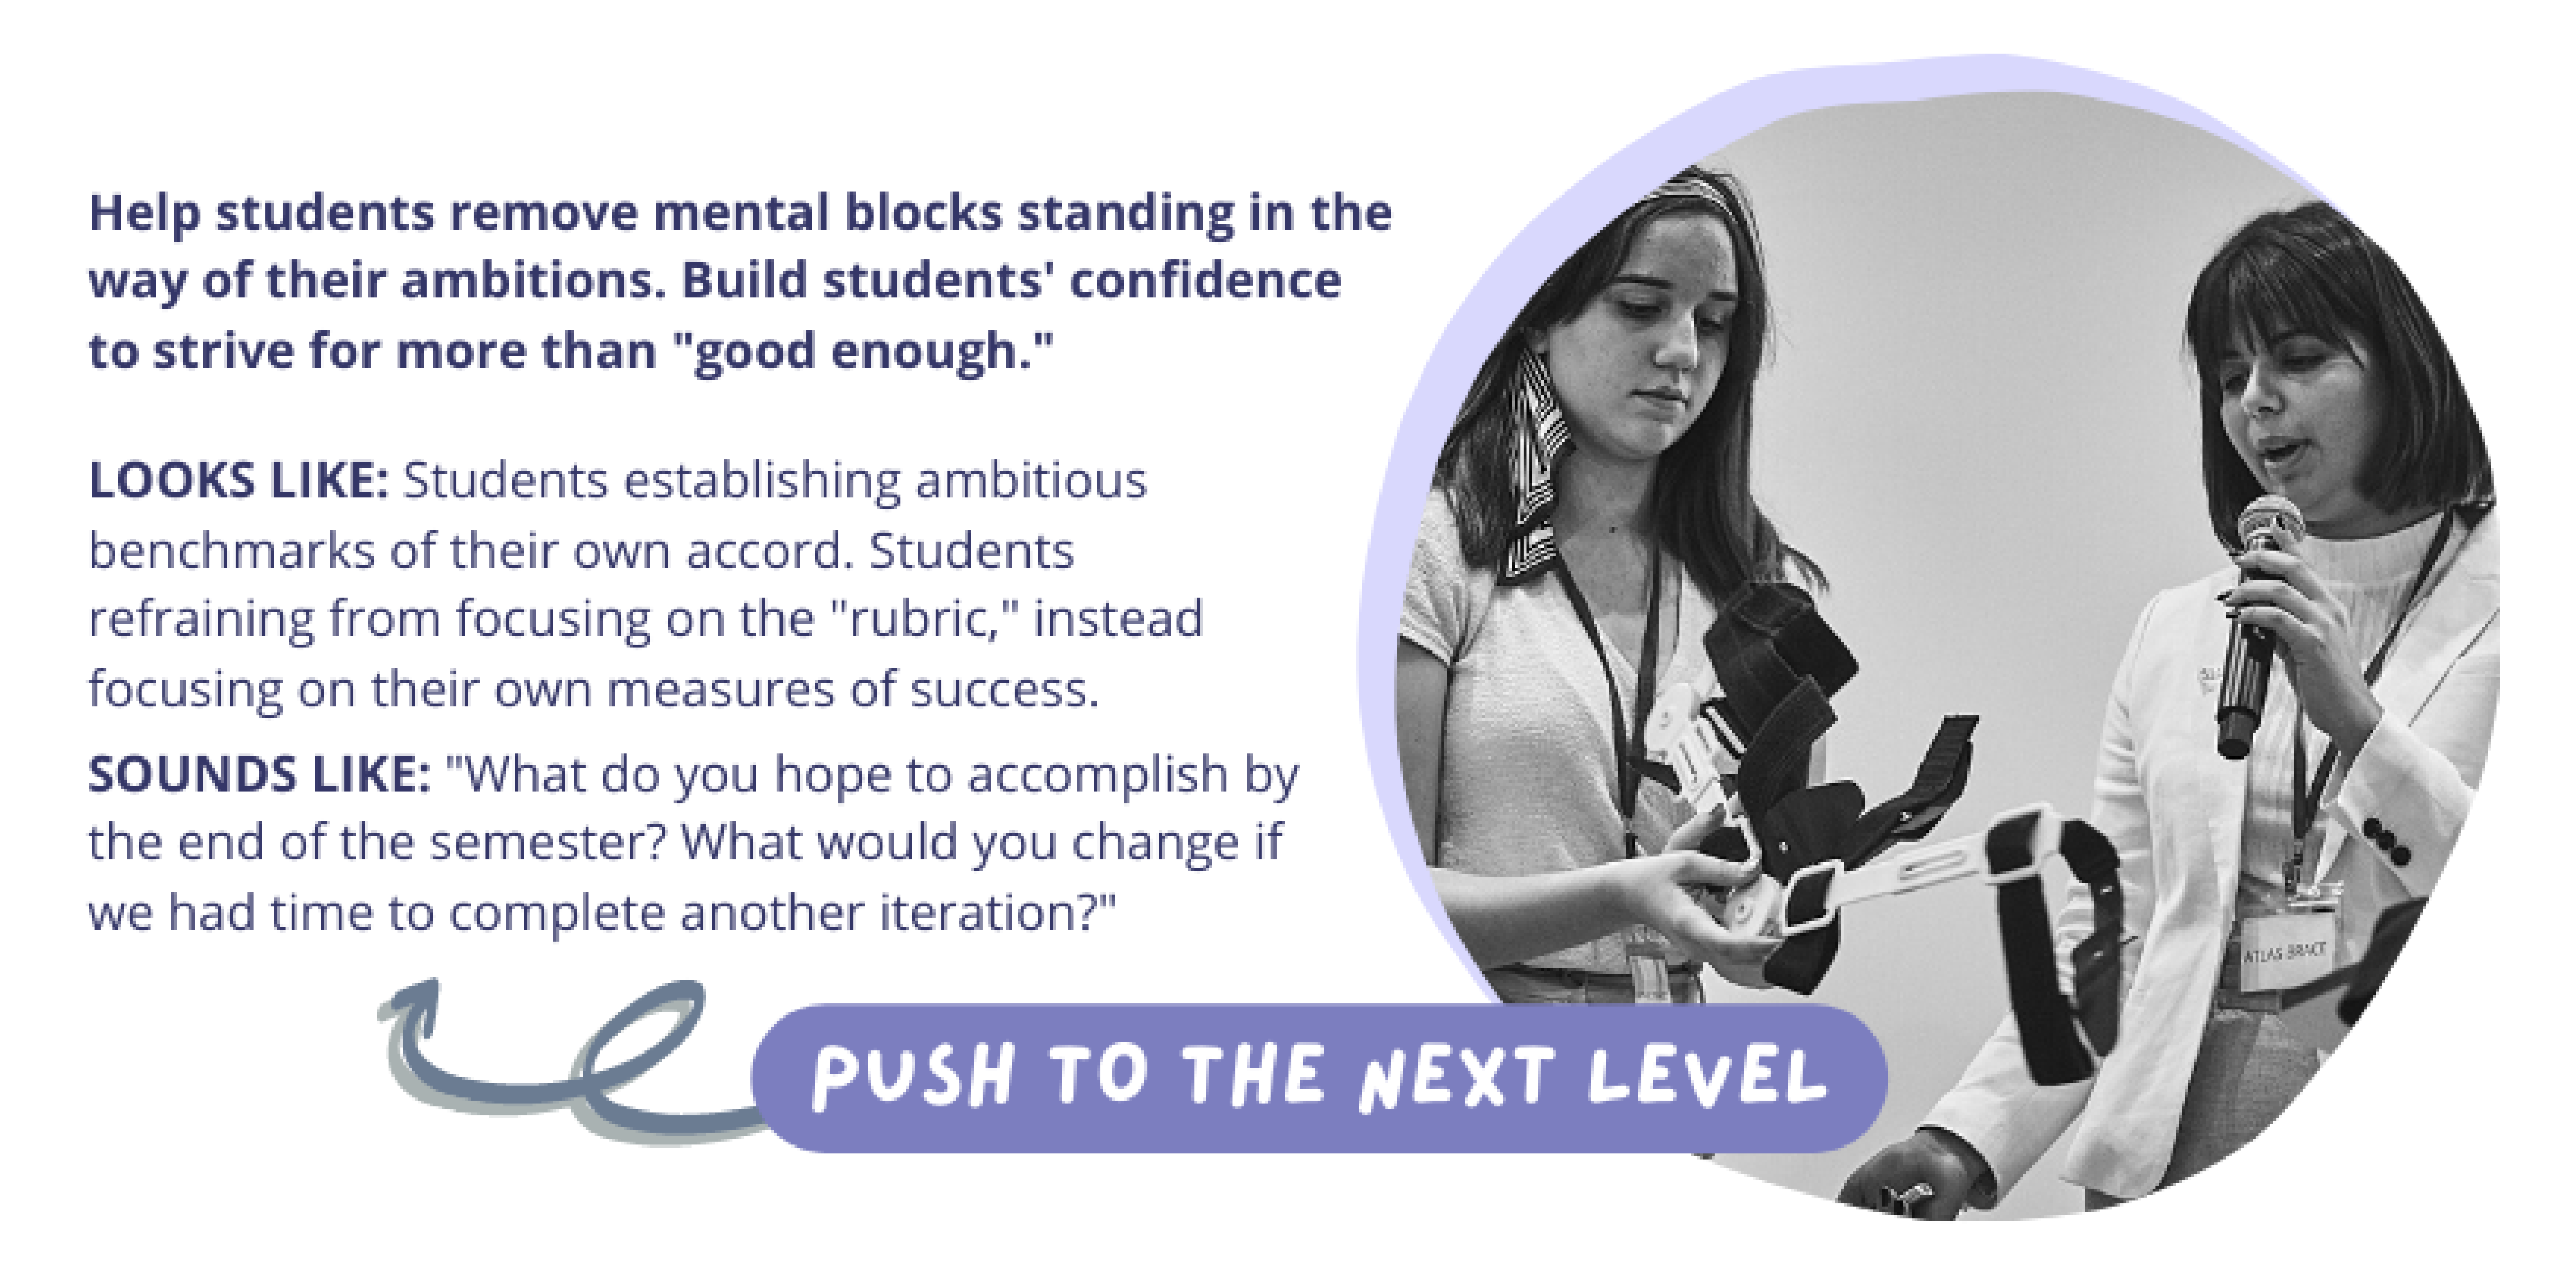 Push to the Next Level: Help students remove mental blocks standing in the way of their ambitions. Build students' confidence to strive for more than "good enough."